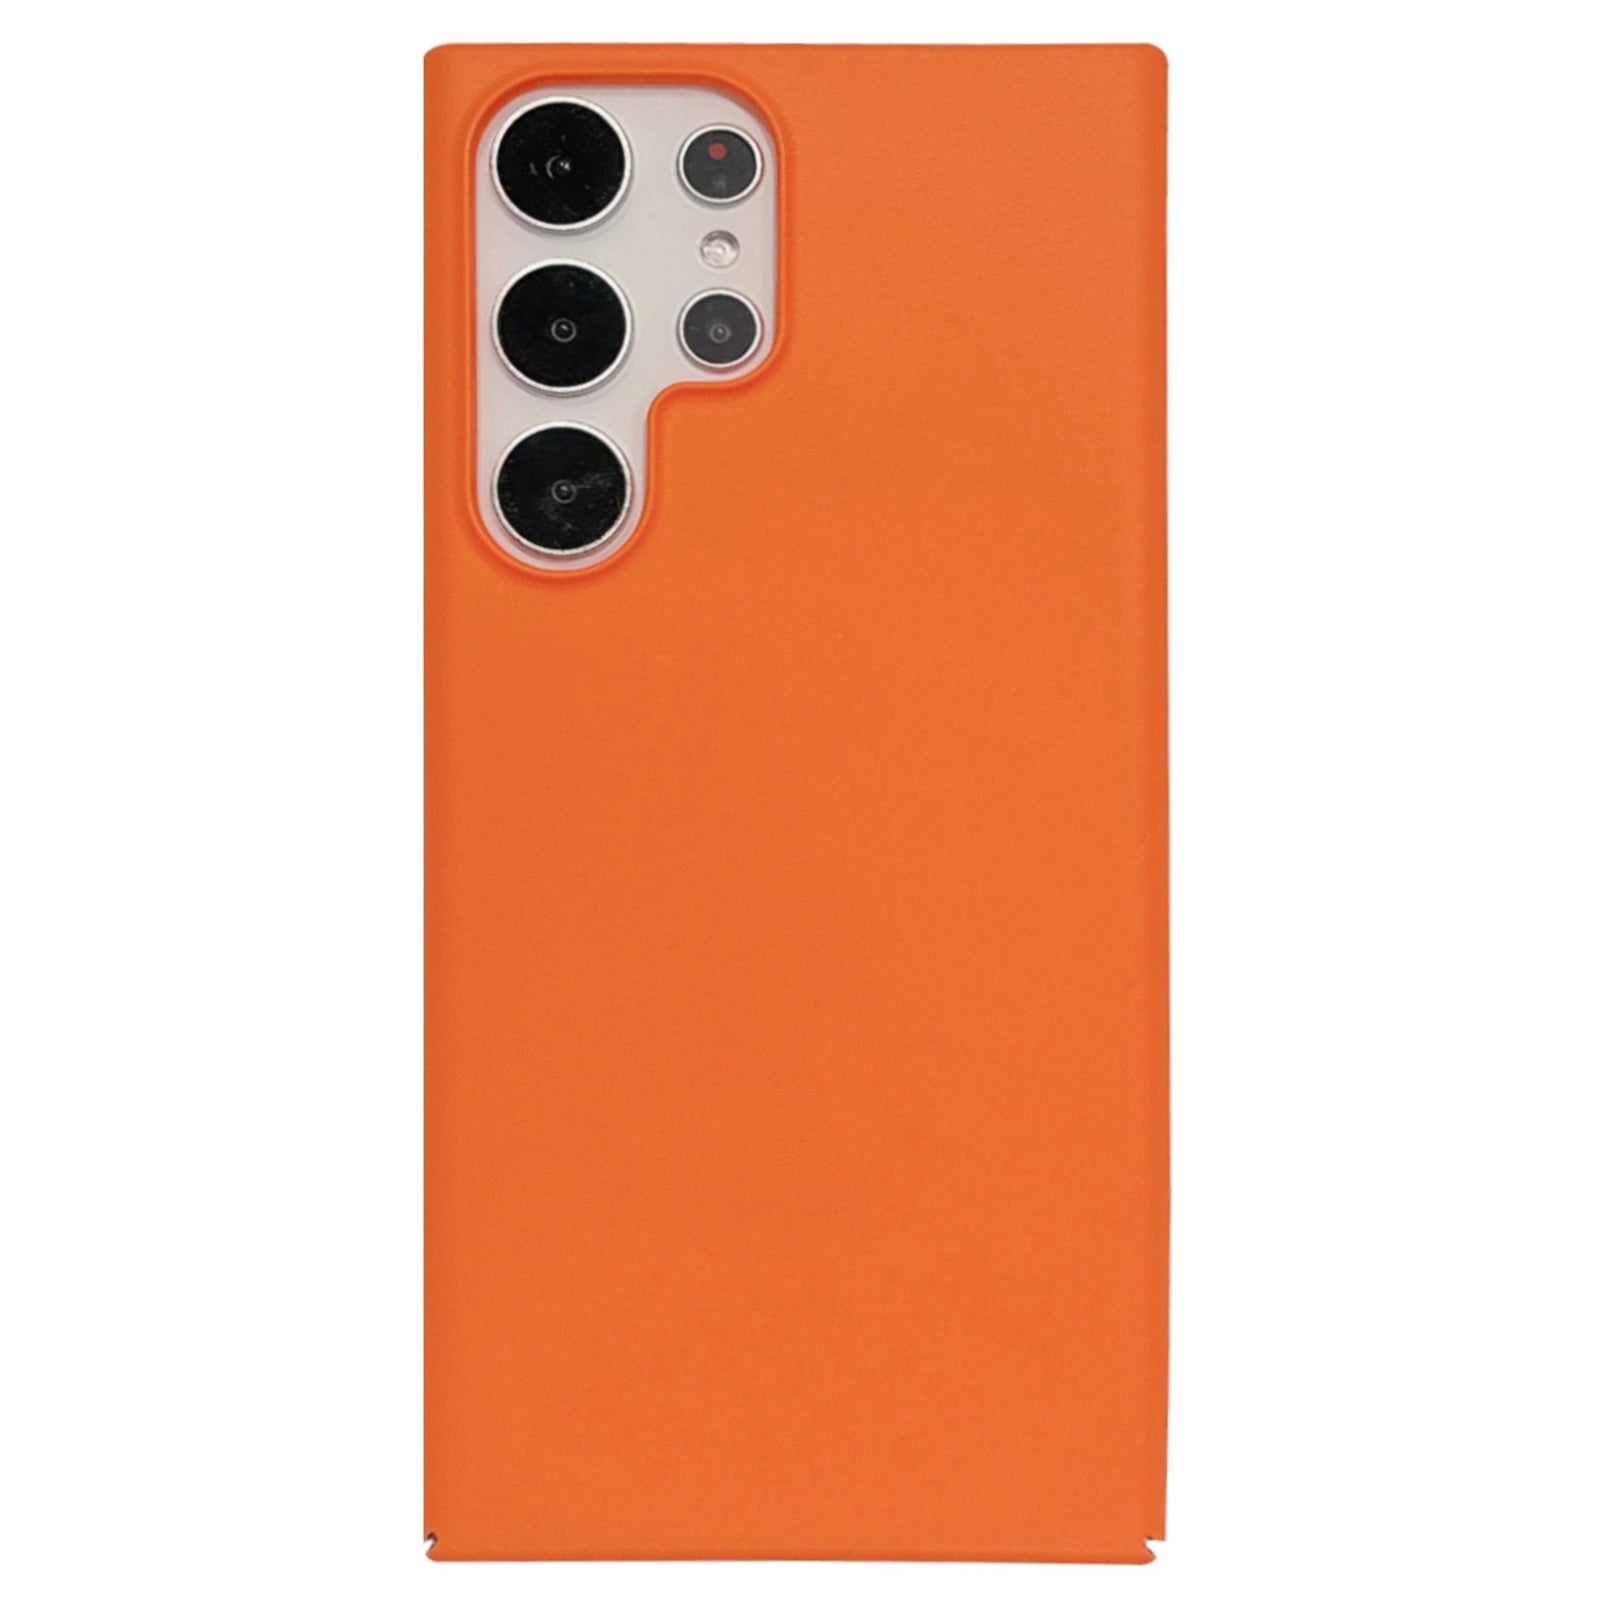 VOERO For Samsung Galaxy S24 Ultra Cell Phone Case Rubberized PC Mobile Phone Cover - Orange